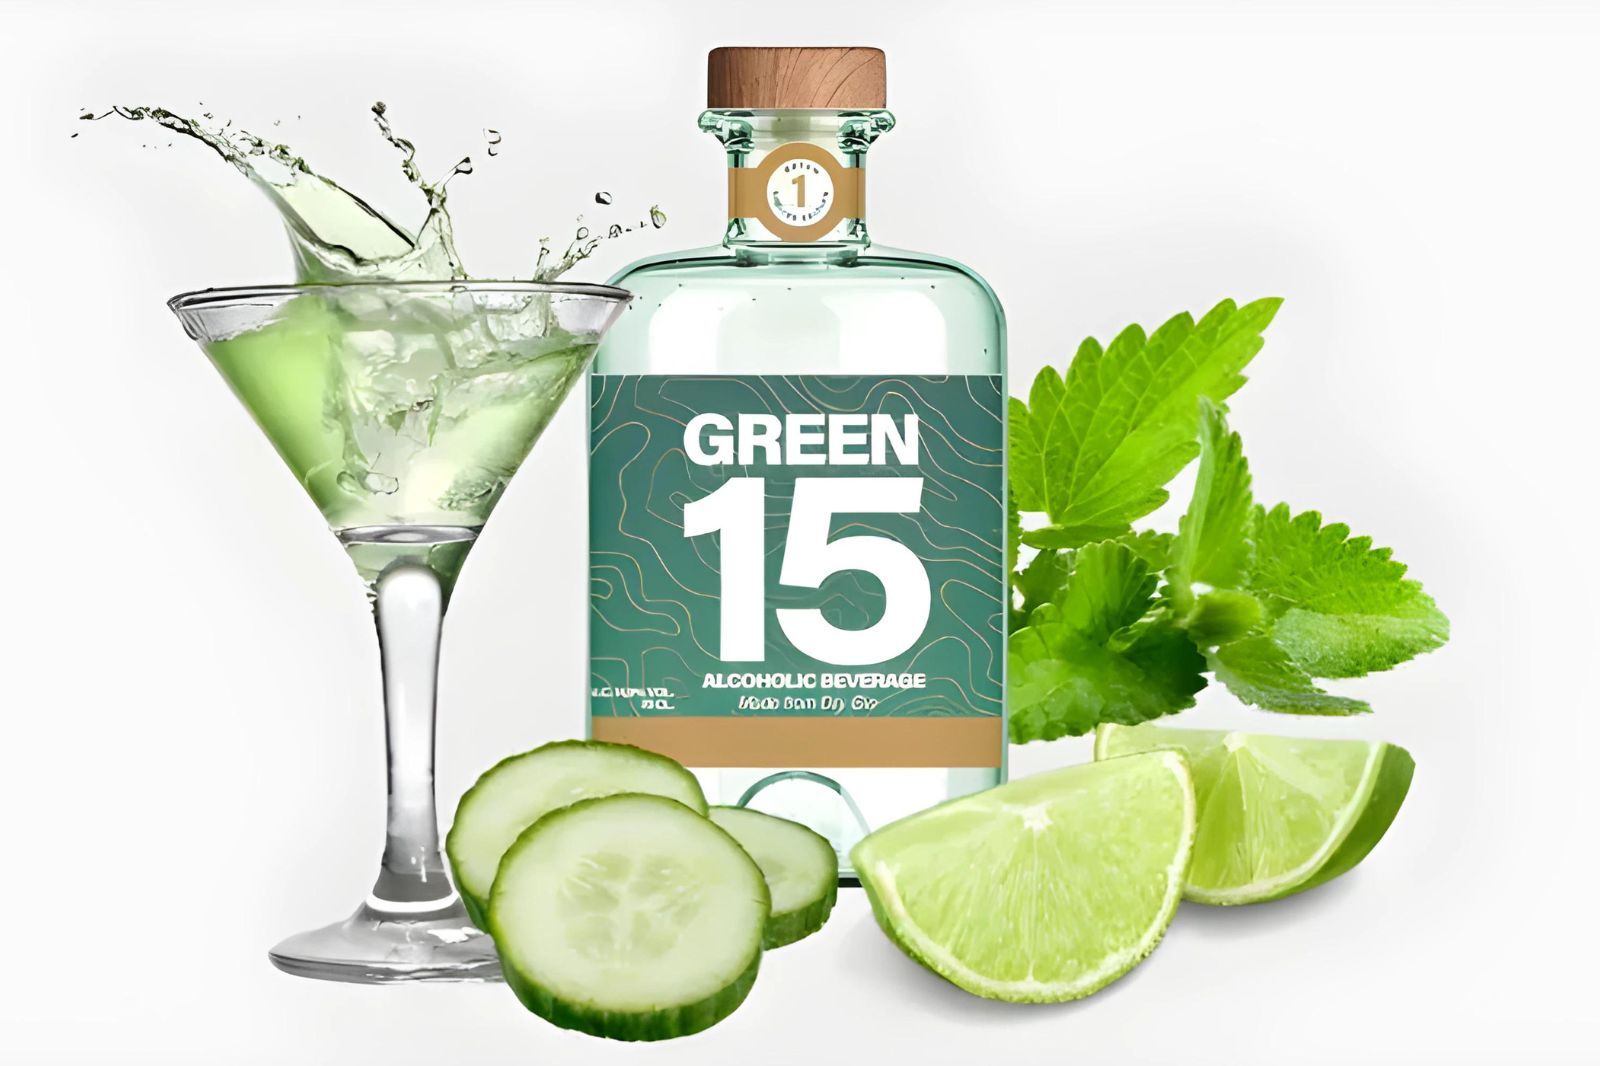 Photo for: GREEN15 wins SILVER MEDAL at the 2024 London Spirits Competition